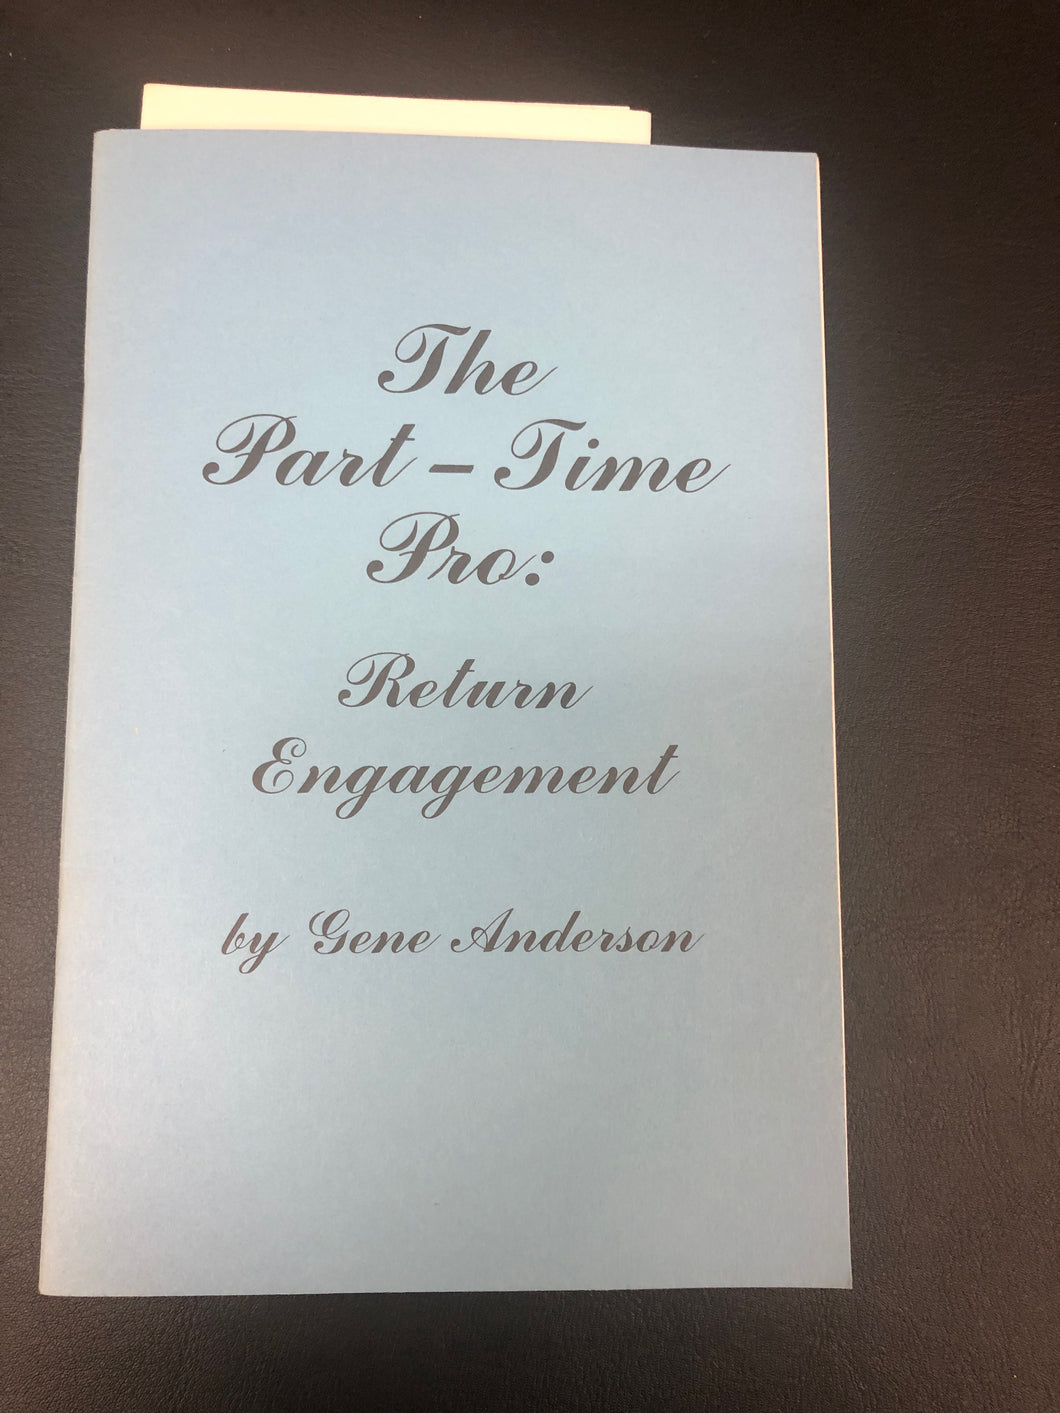 The Part-Time Pro: Return Engagement by Gene Anderson